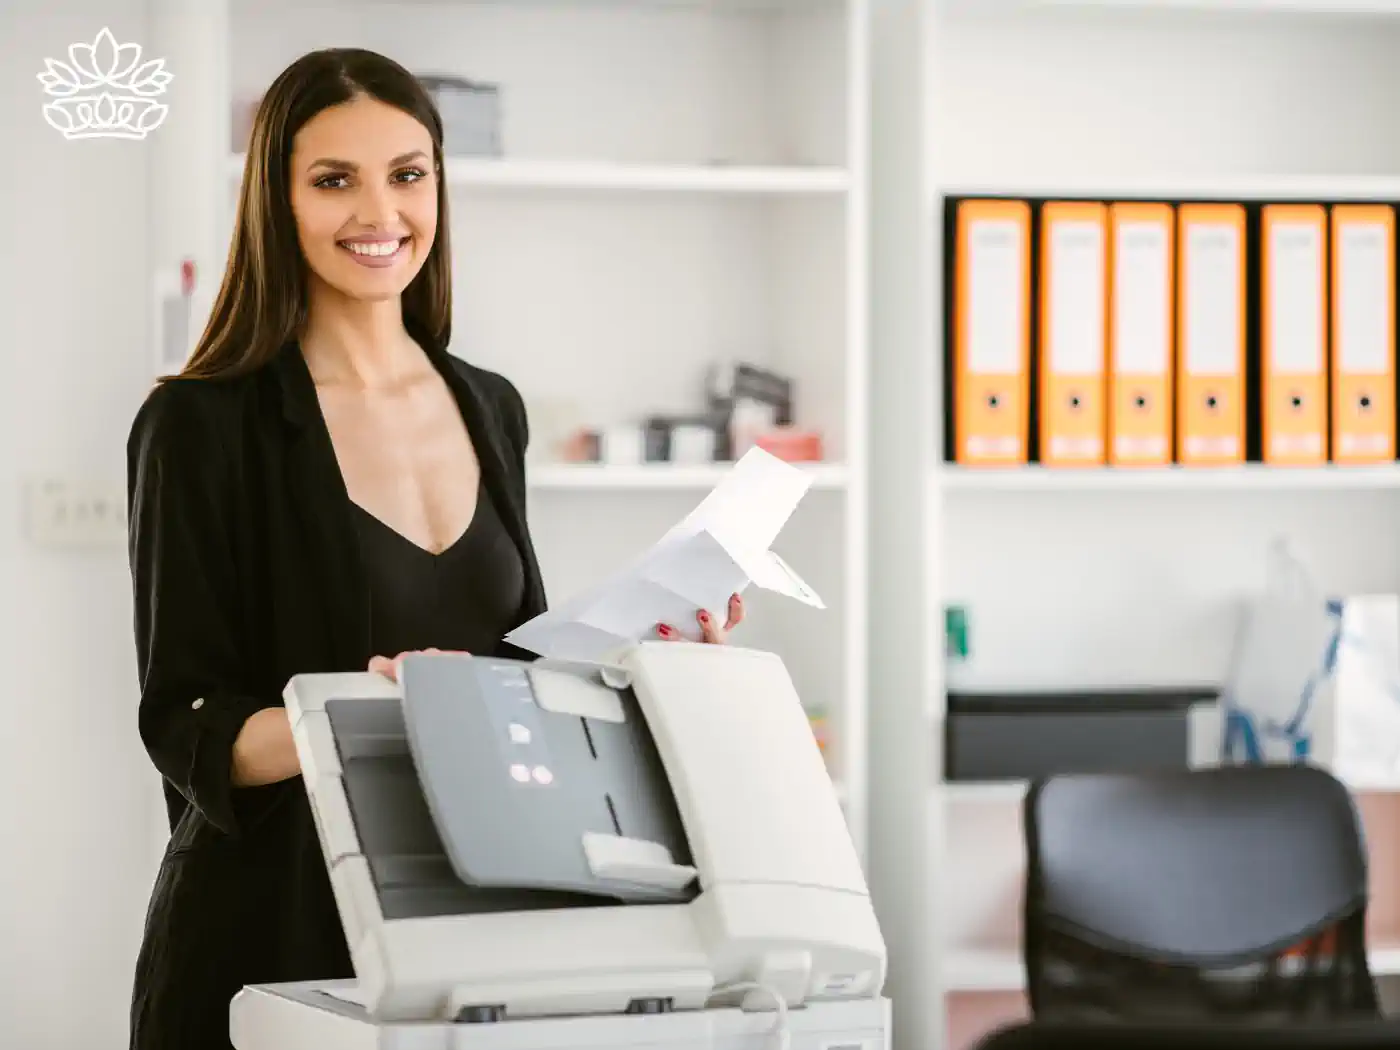 Professional secretary smiling while using a copier in a modern office, exemplifying efficiency and dedication. Fabulous Flowers and Gifts.